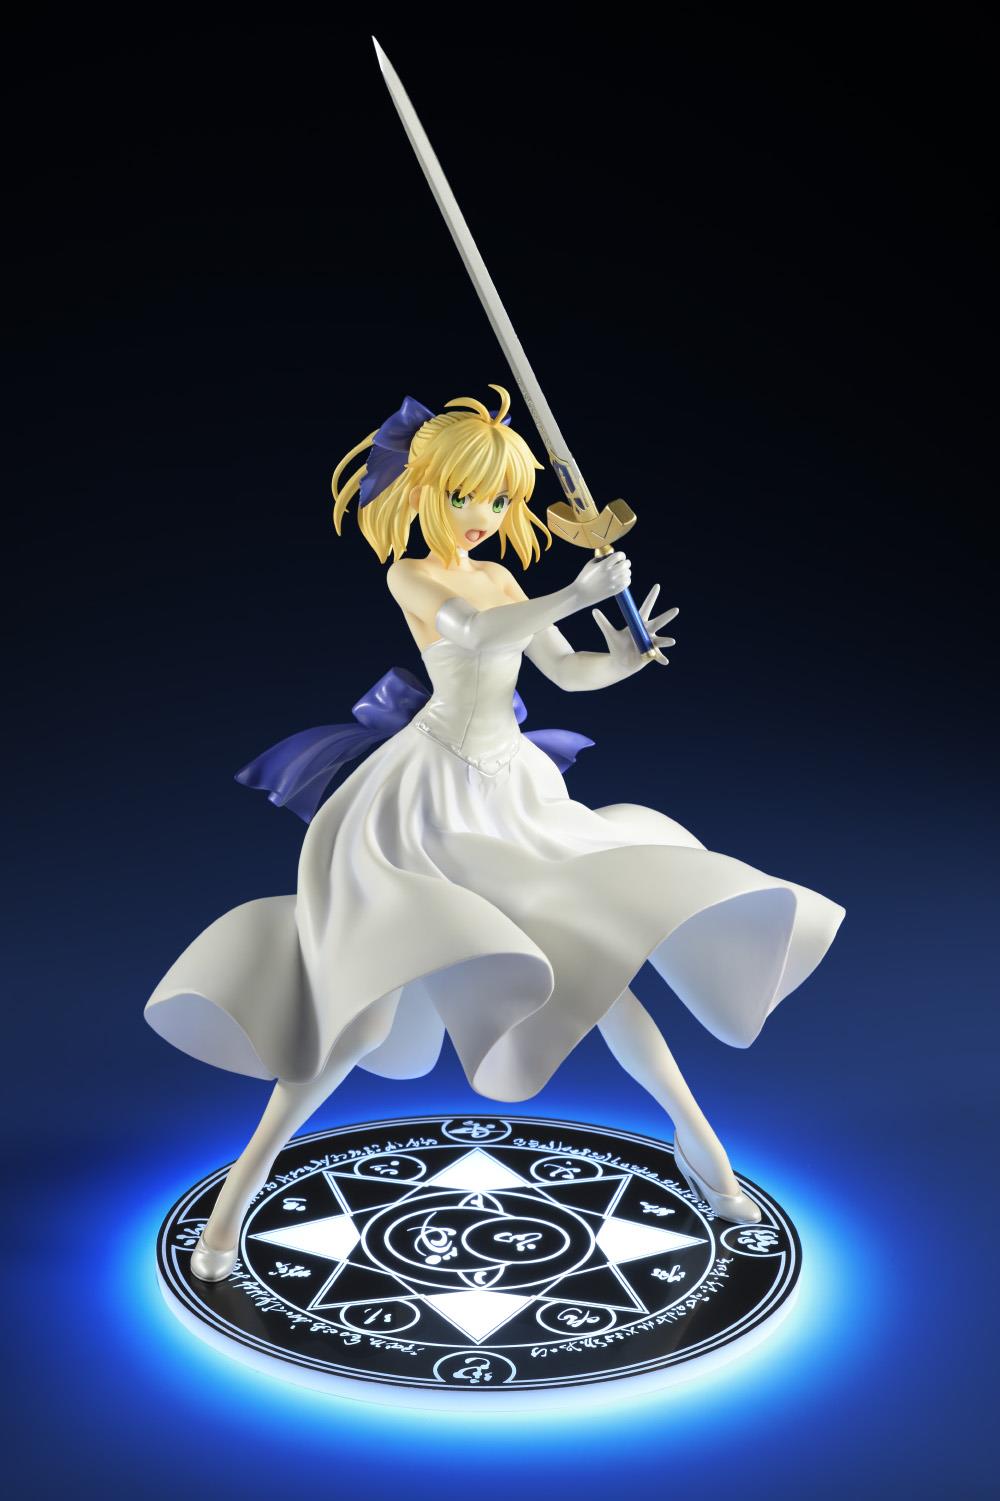 Fate/Stay Night: Saber White Dress Renewal ver. 1/8 Scale Figure